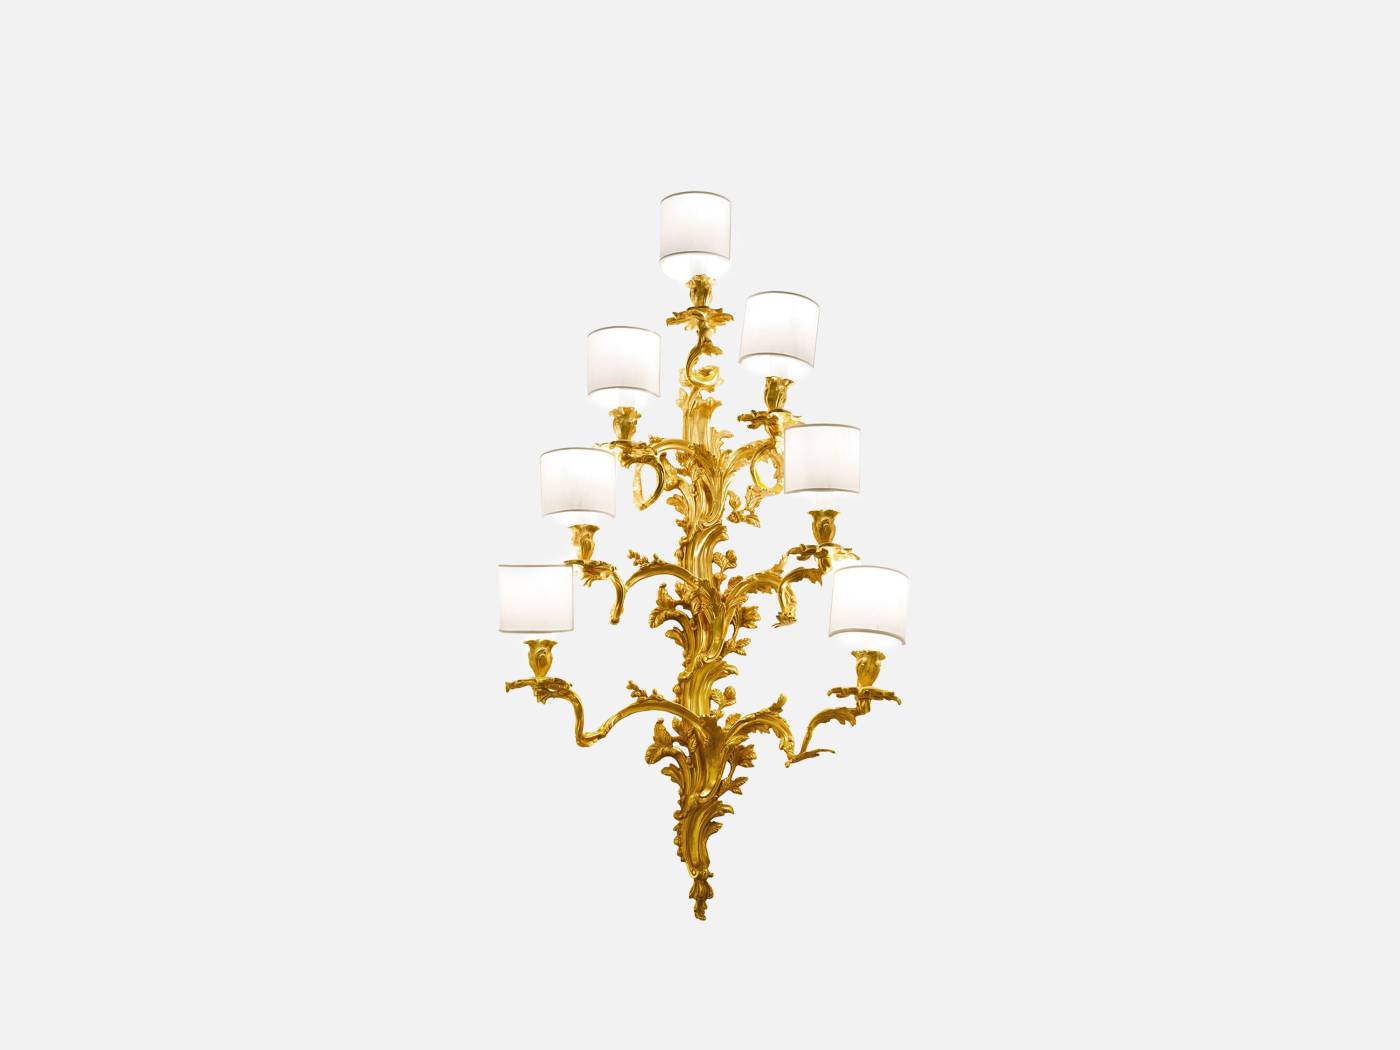 ART. 2060-2 - C.G. Capelletti quality furniture with made in Italy contemporary Lighting